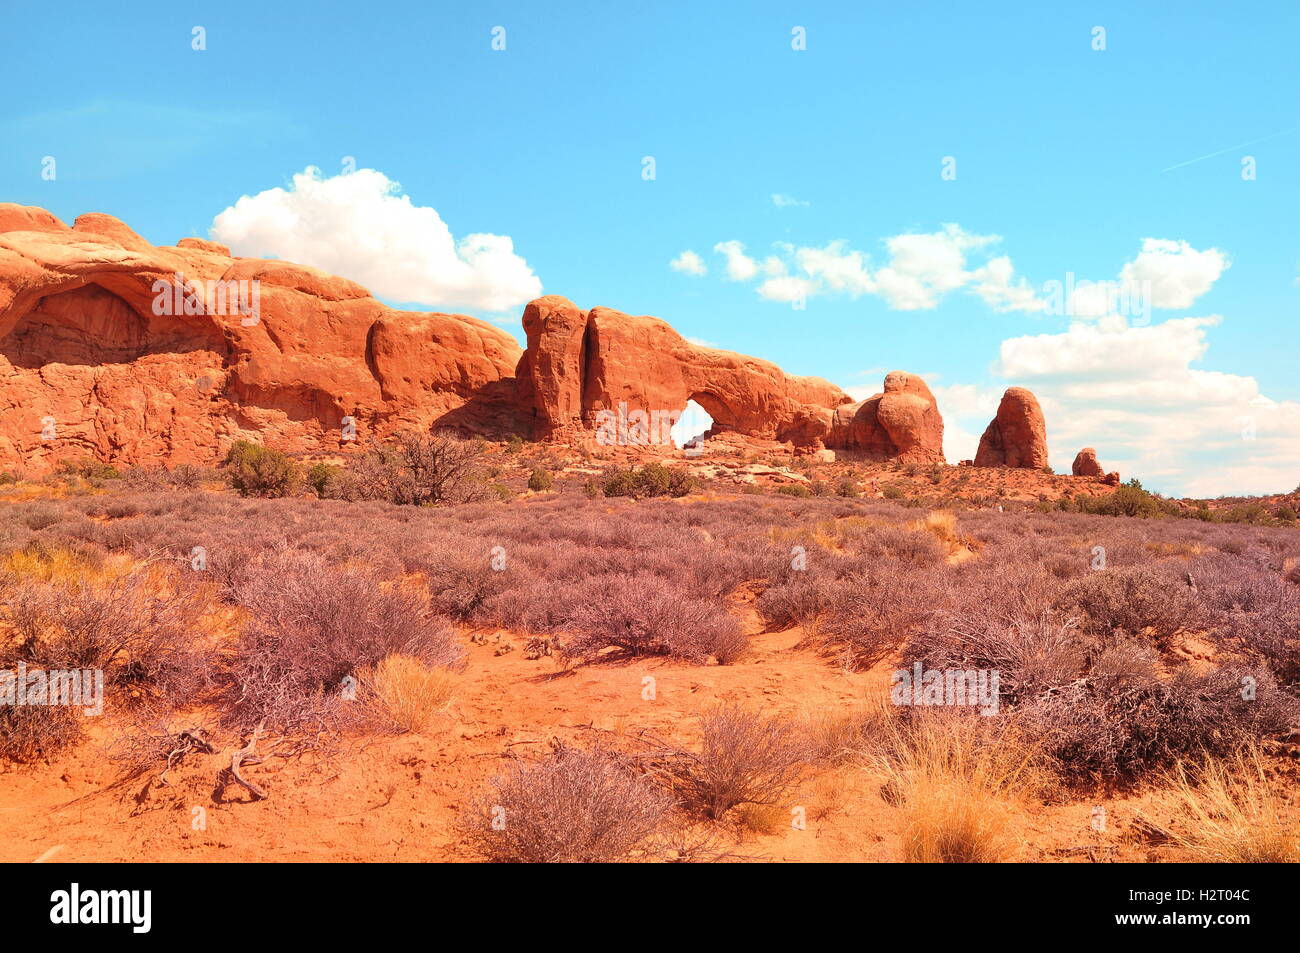 North Window in Arches National Park, Utah, USA Stock Photo